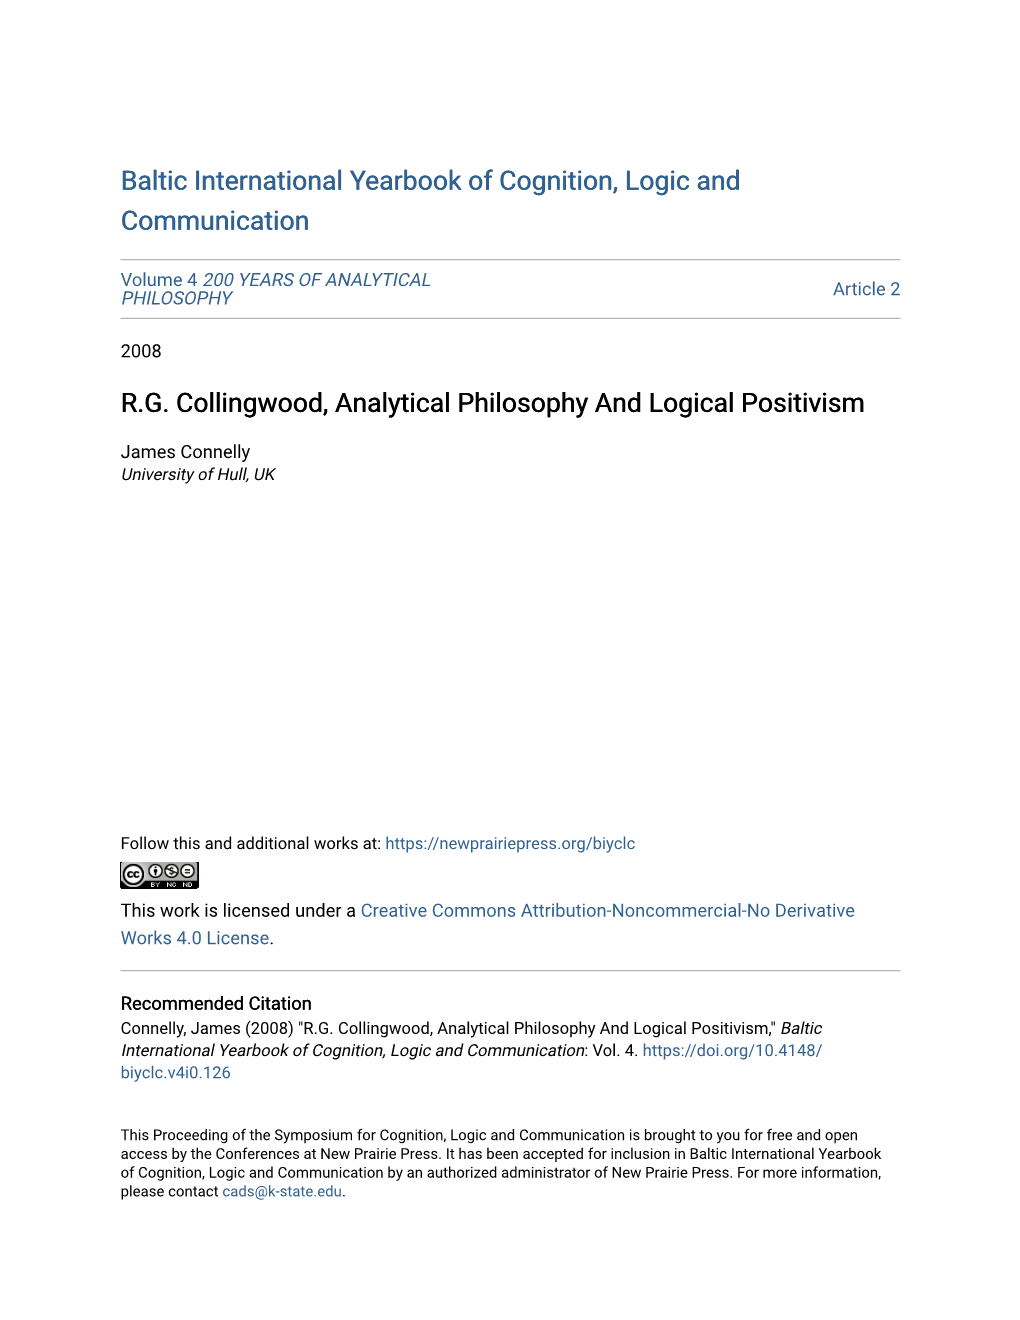 R.G. Collingwood, Analytical Philosophy and Logical Positivism